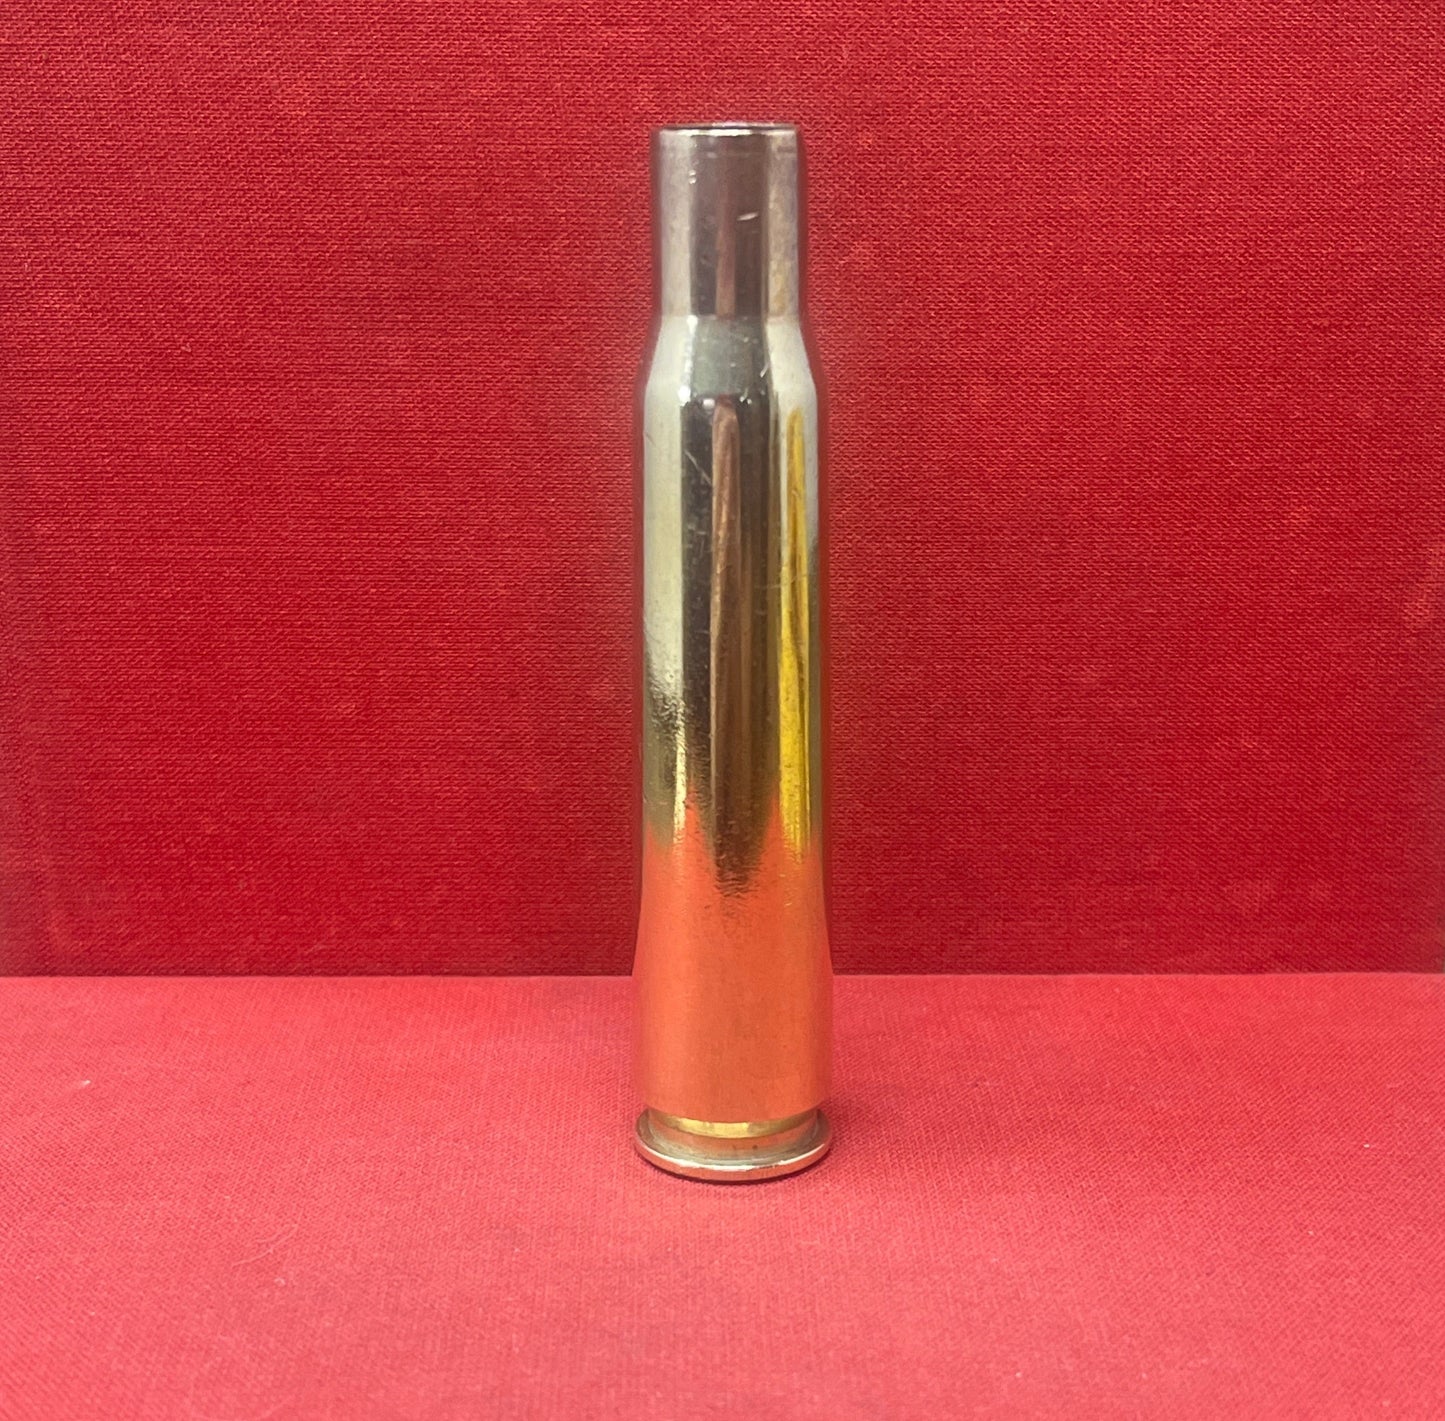 50 Cal Cartridge Case. Headstamp IVI =  General Dynamics Ordnance and Tactical Systems – Canada Inc.